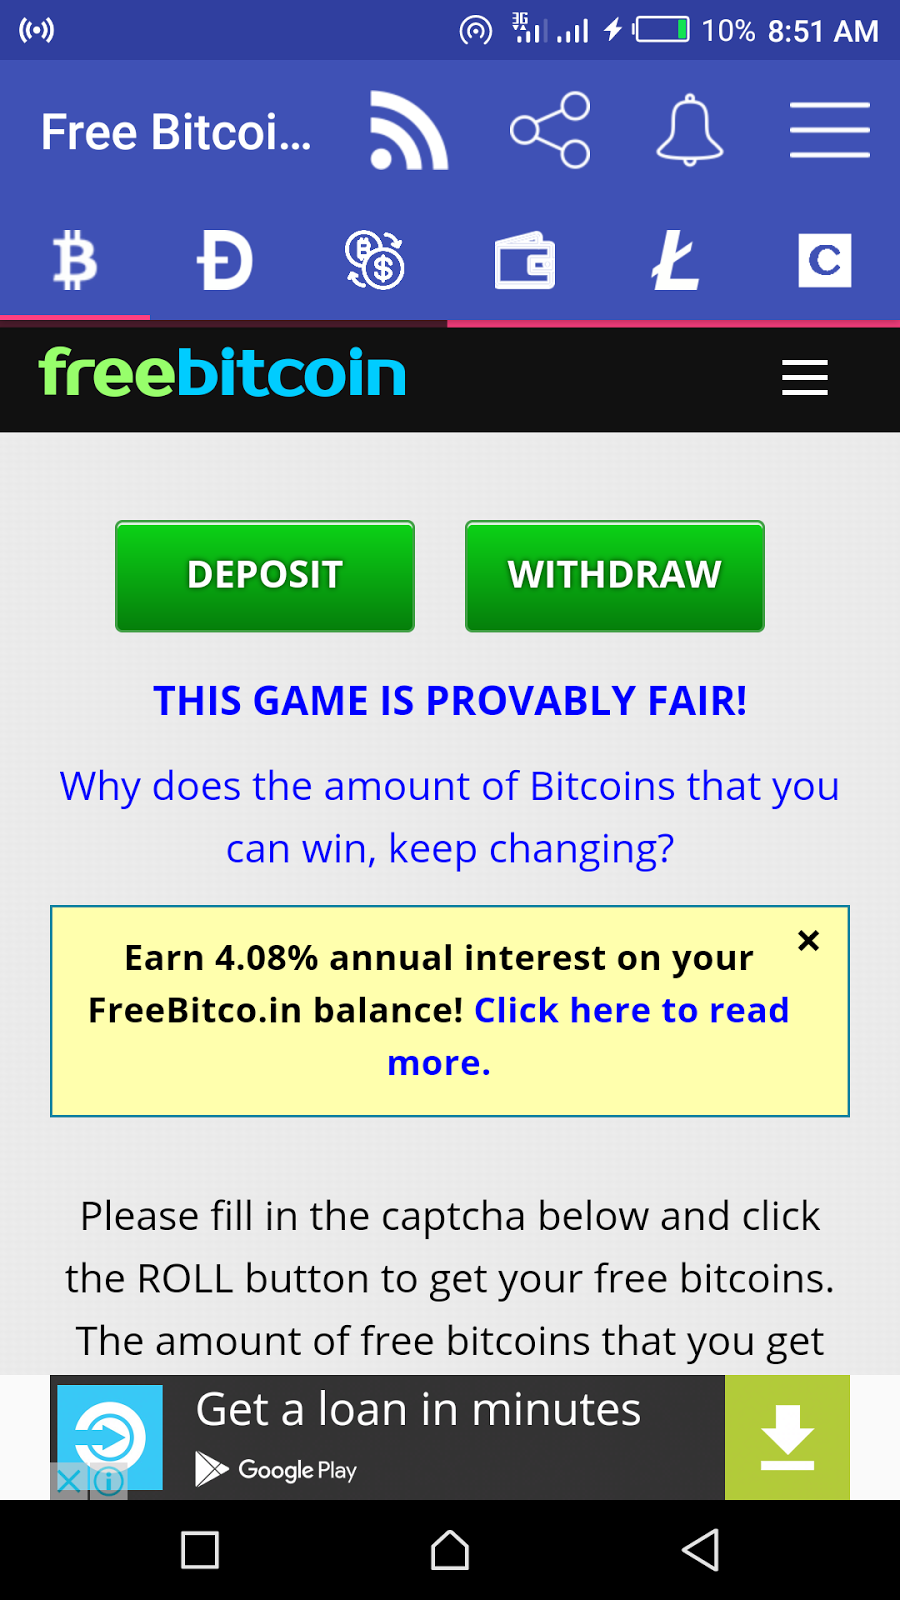 How To Earn Free Bitcoin From Your Mobile With Free Bitcoin App - 